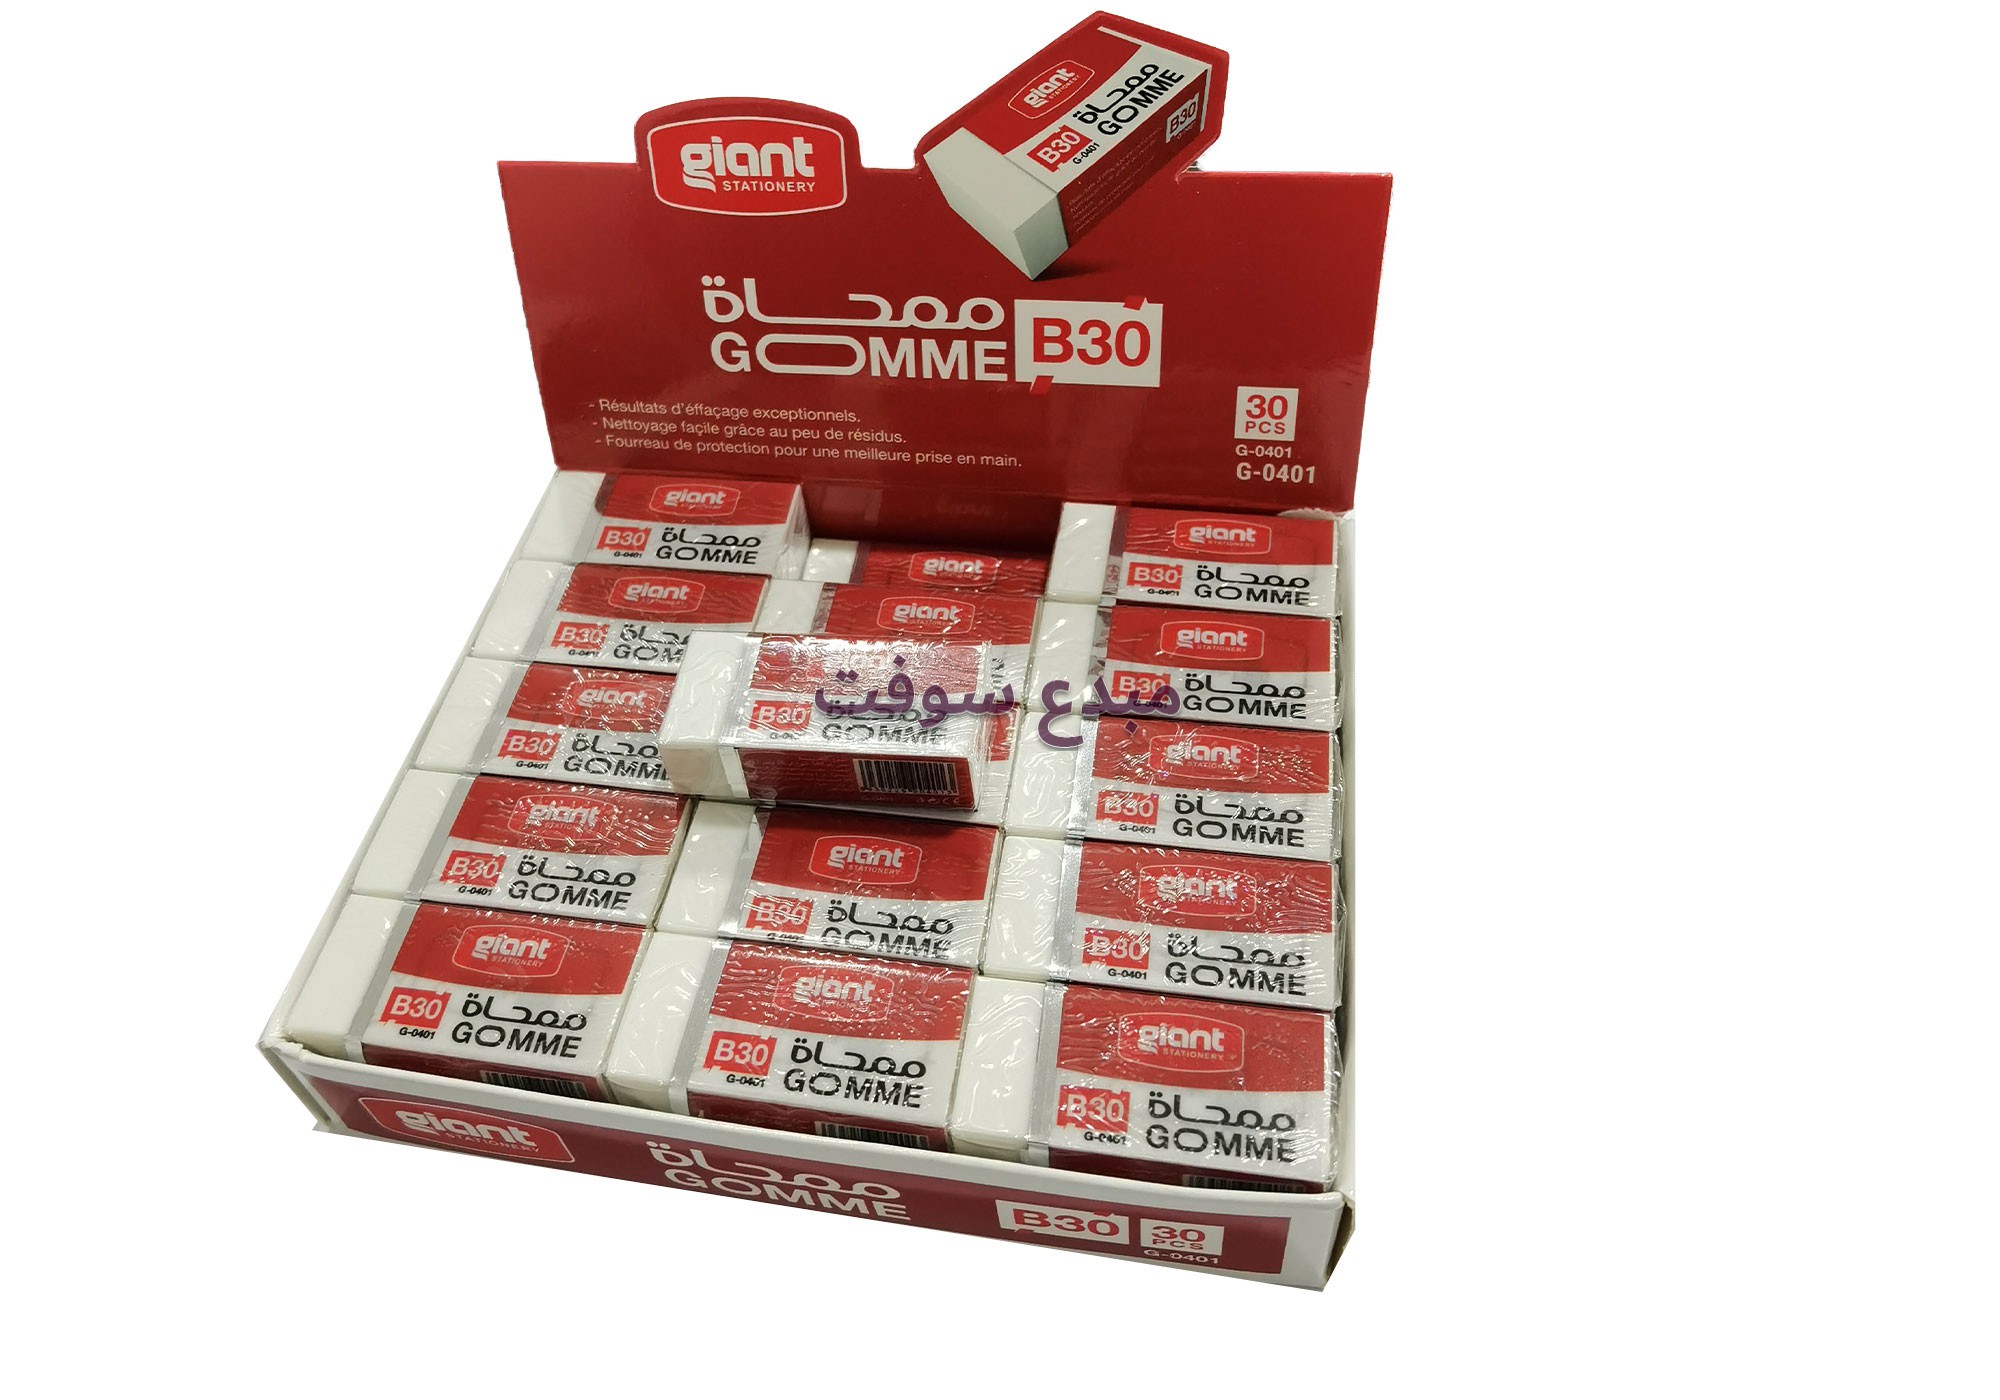 GOMME BLANCH  B30  GIANT G-0401  30pcs 